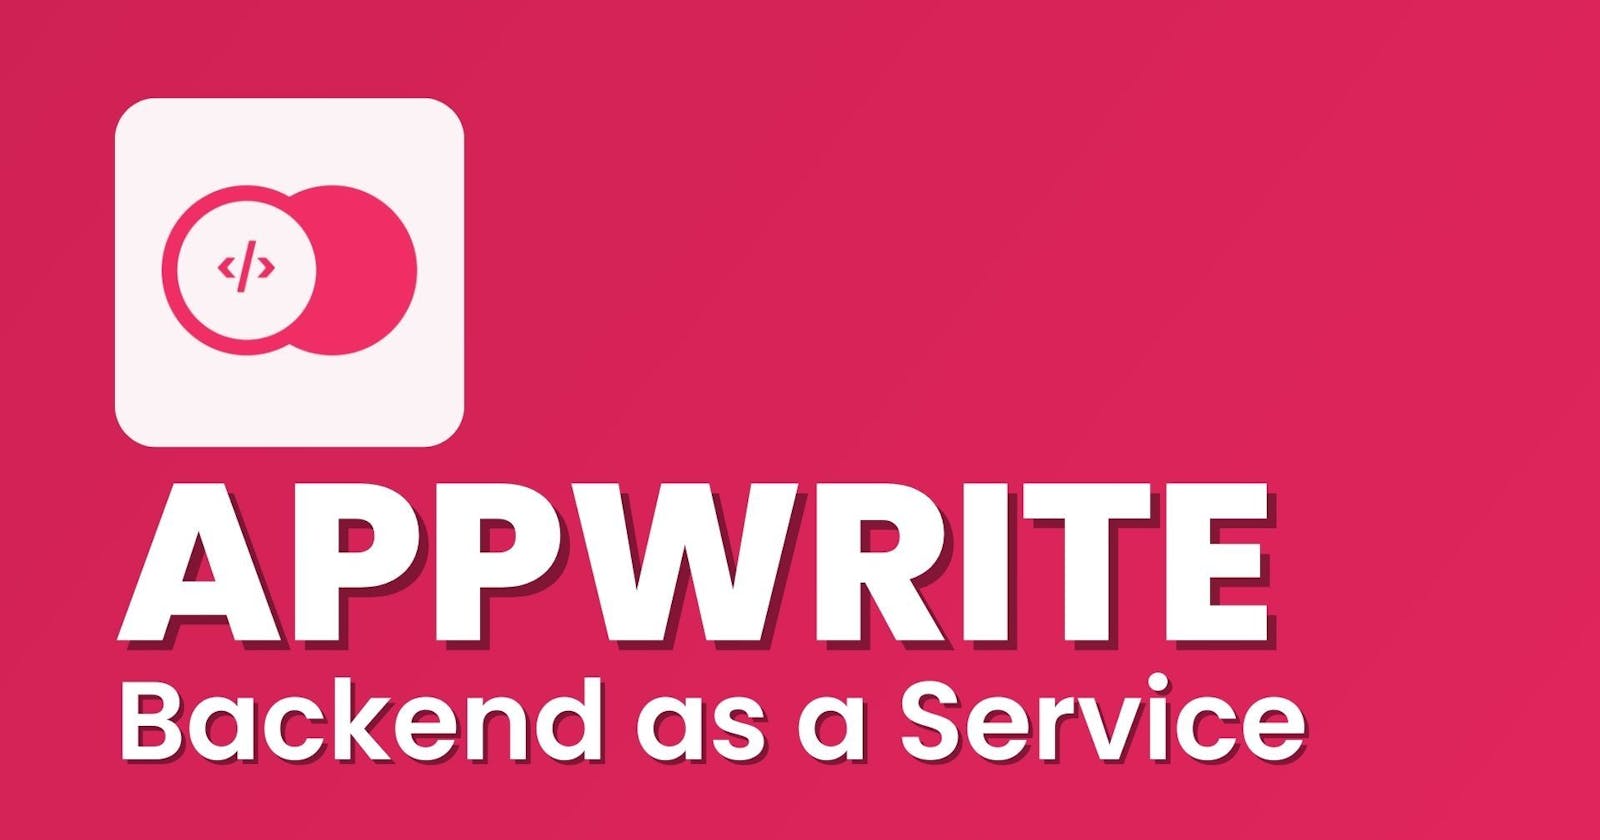 How to use Appwrite as a backend service: Buiding a chat app with Appwrite